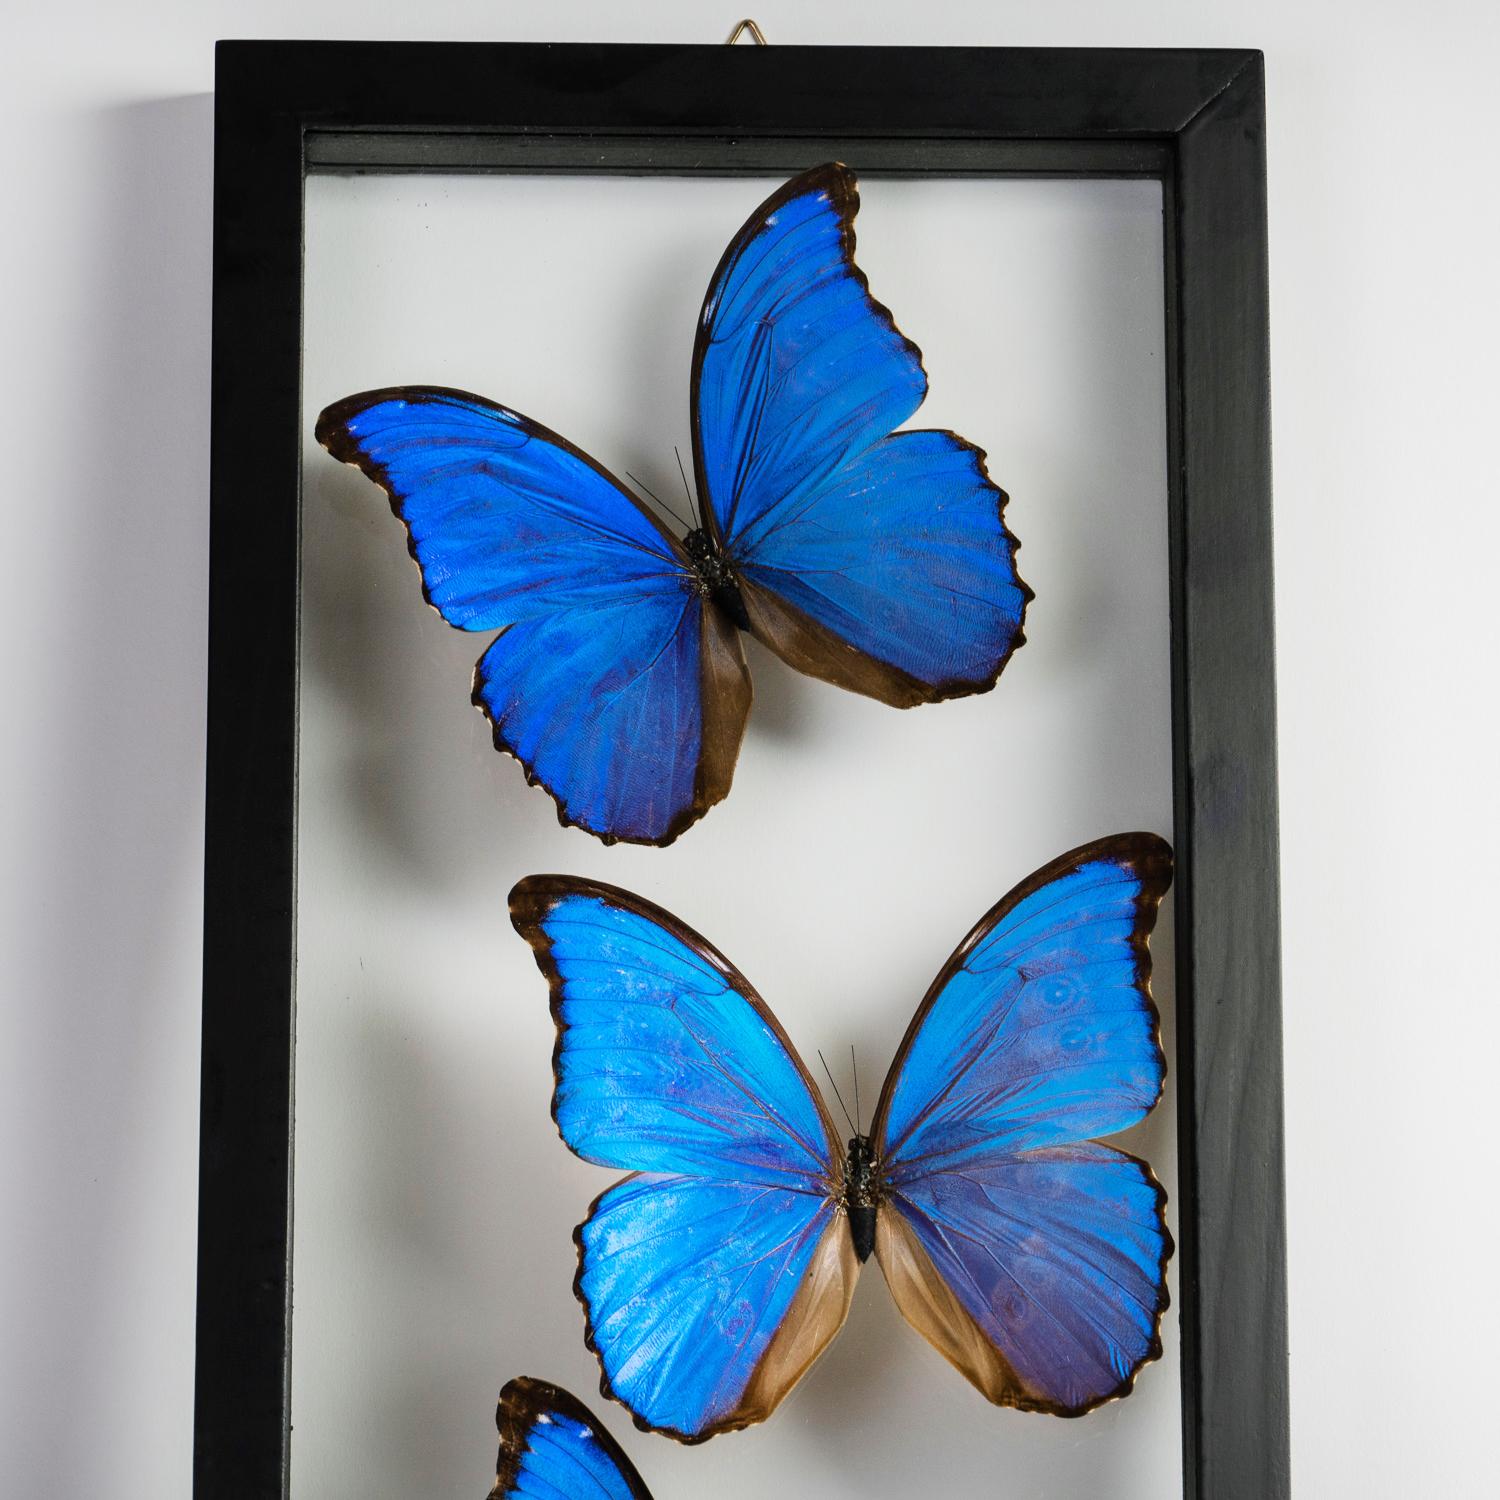 Contemporary 7 Real Morpho Butterflies Specimen in Display Frame